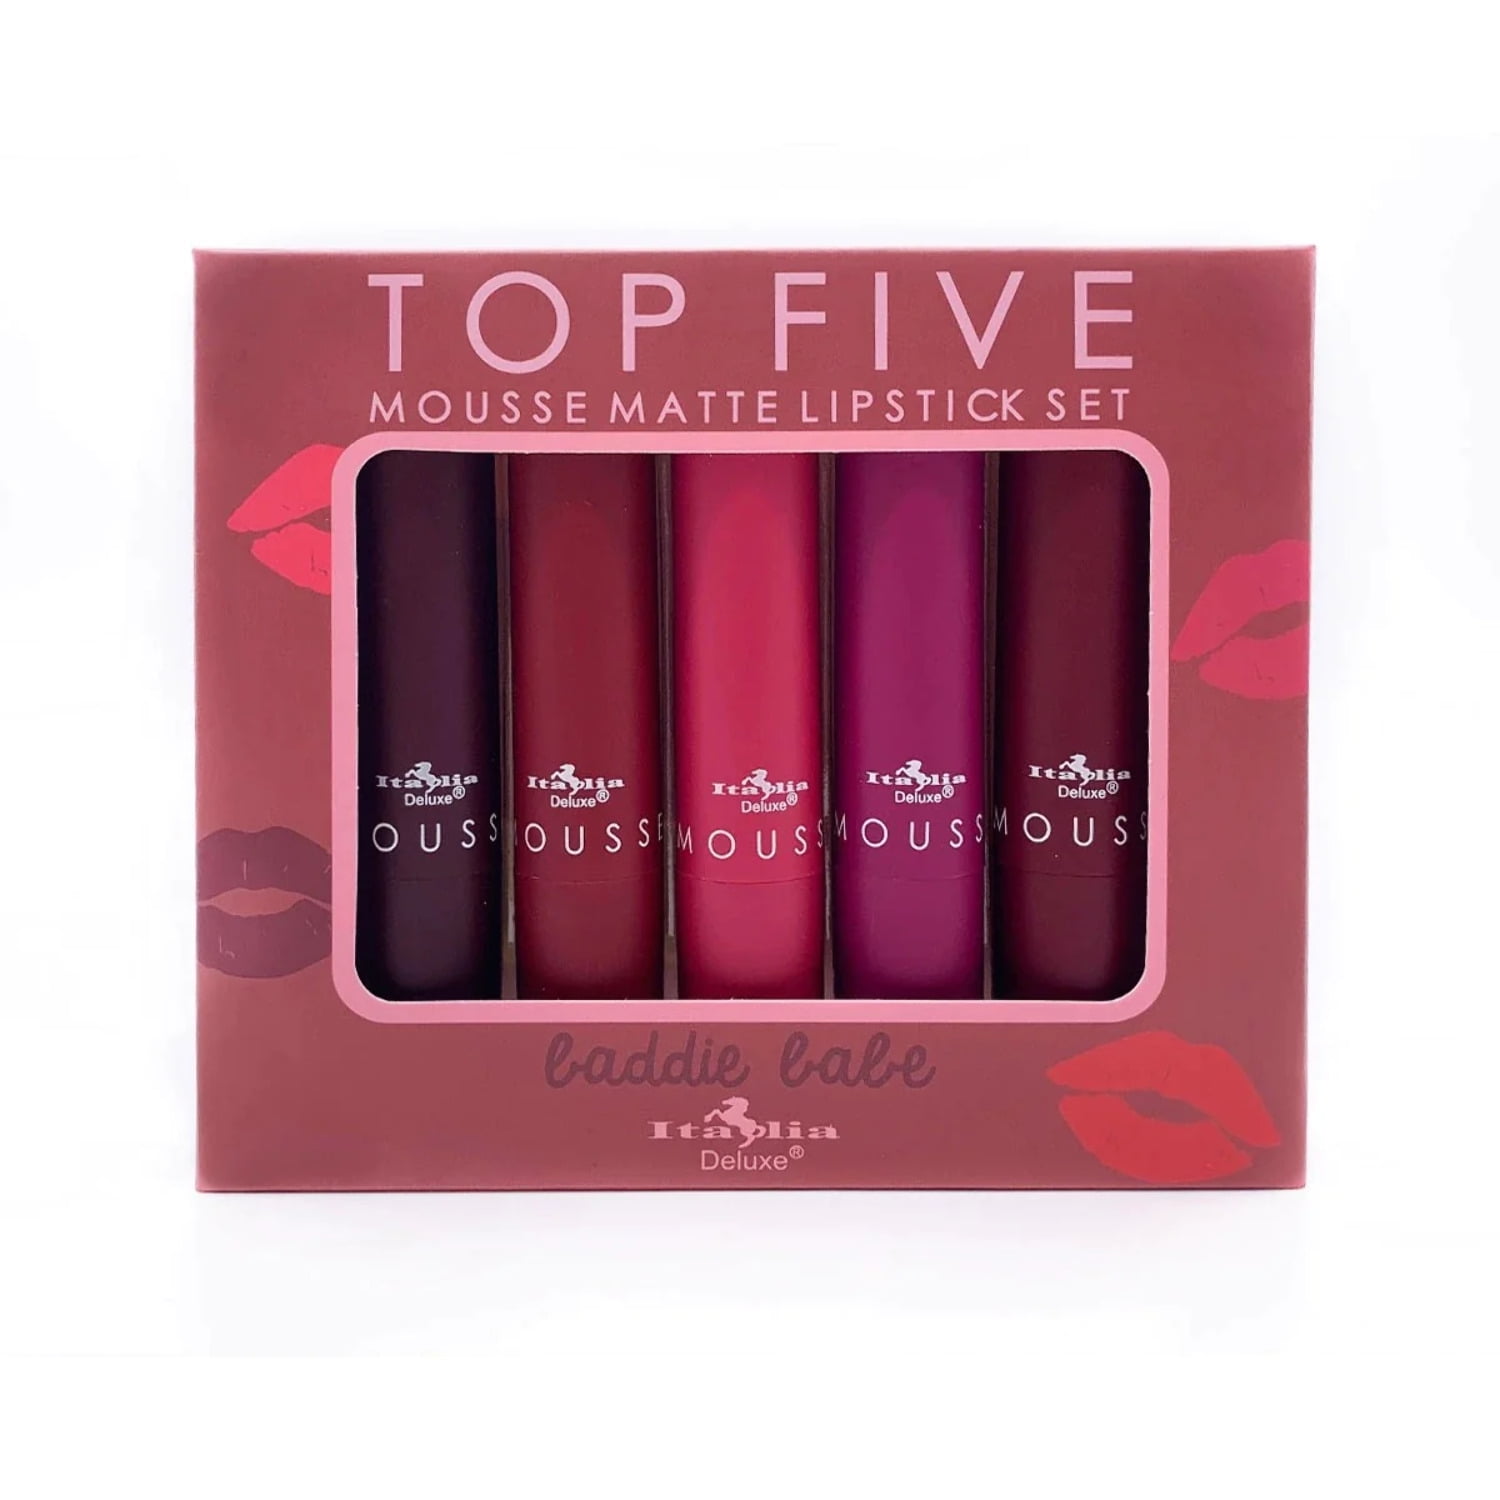 My Top Five Lipsticks For Formal Wear/Occasions